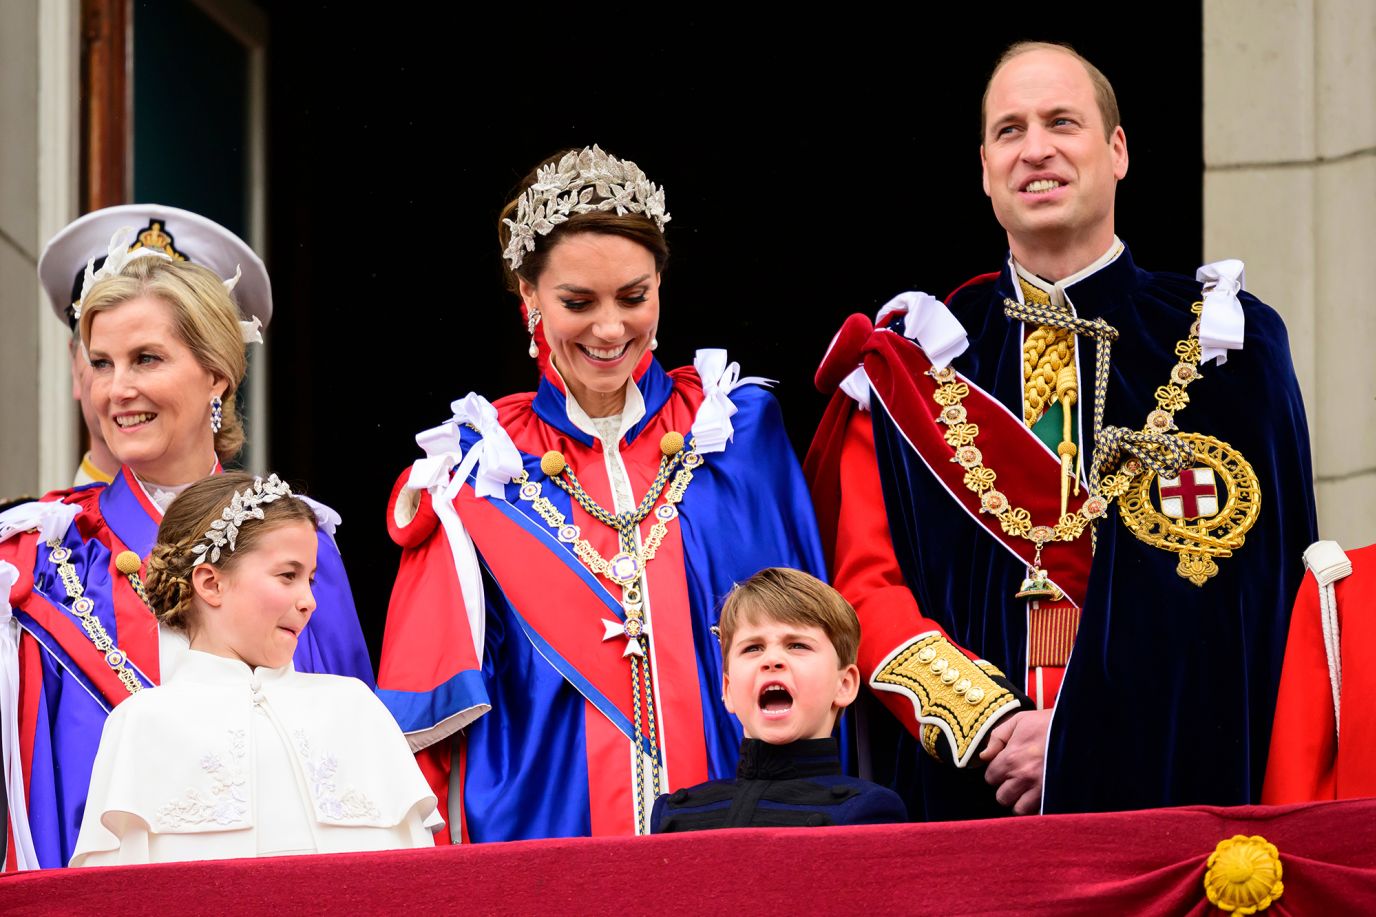 Prince Louis is looked at by his sister, Princess Charlotte, and his mother, Catherine, on the balcony of Buckingham Palace. At right is his dad, Prince William. On the far left is Sophie, the Duchess of Edinburgh.